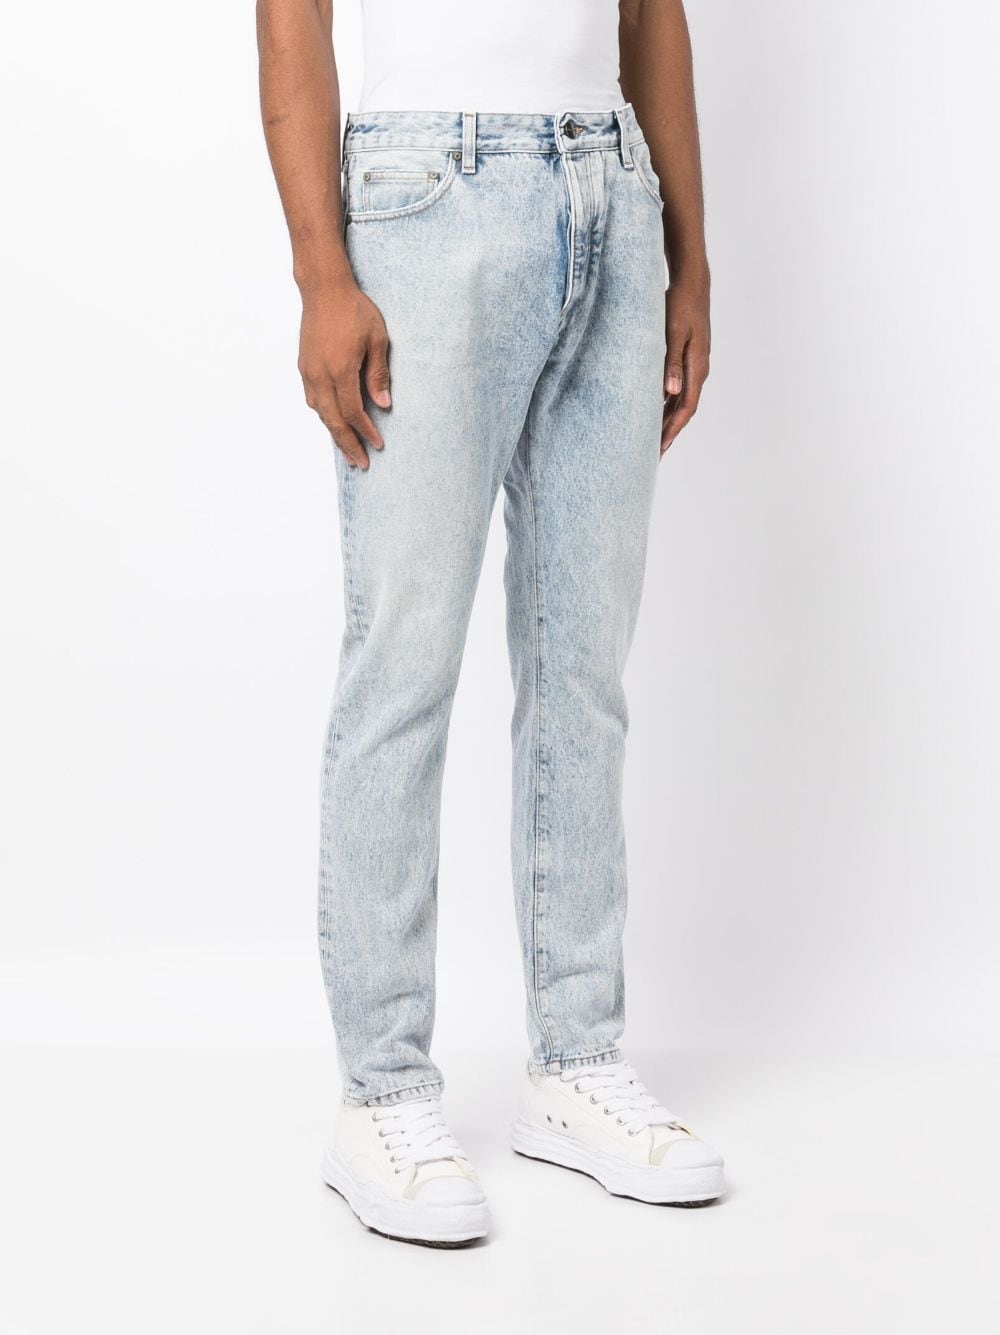 curved-logo print jeans